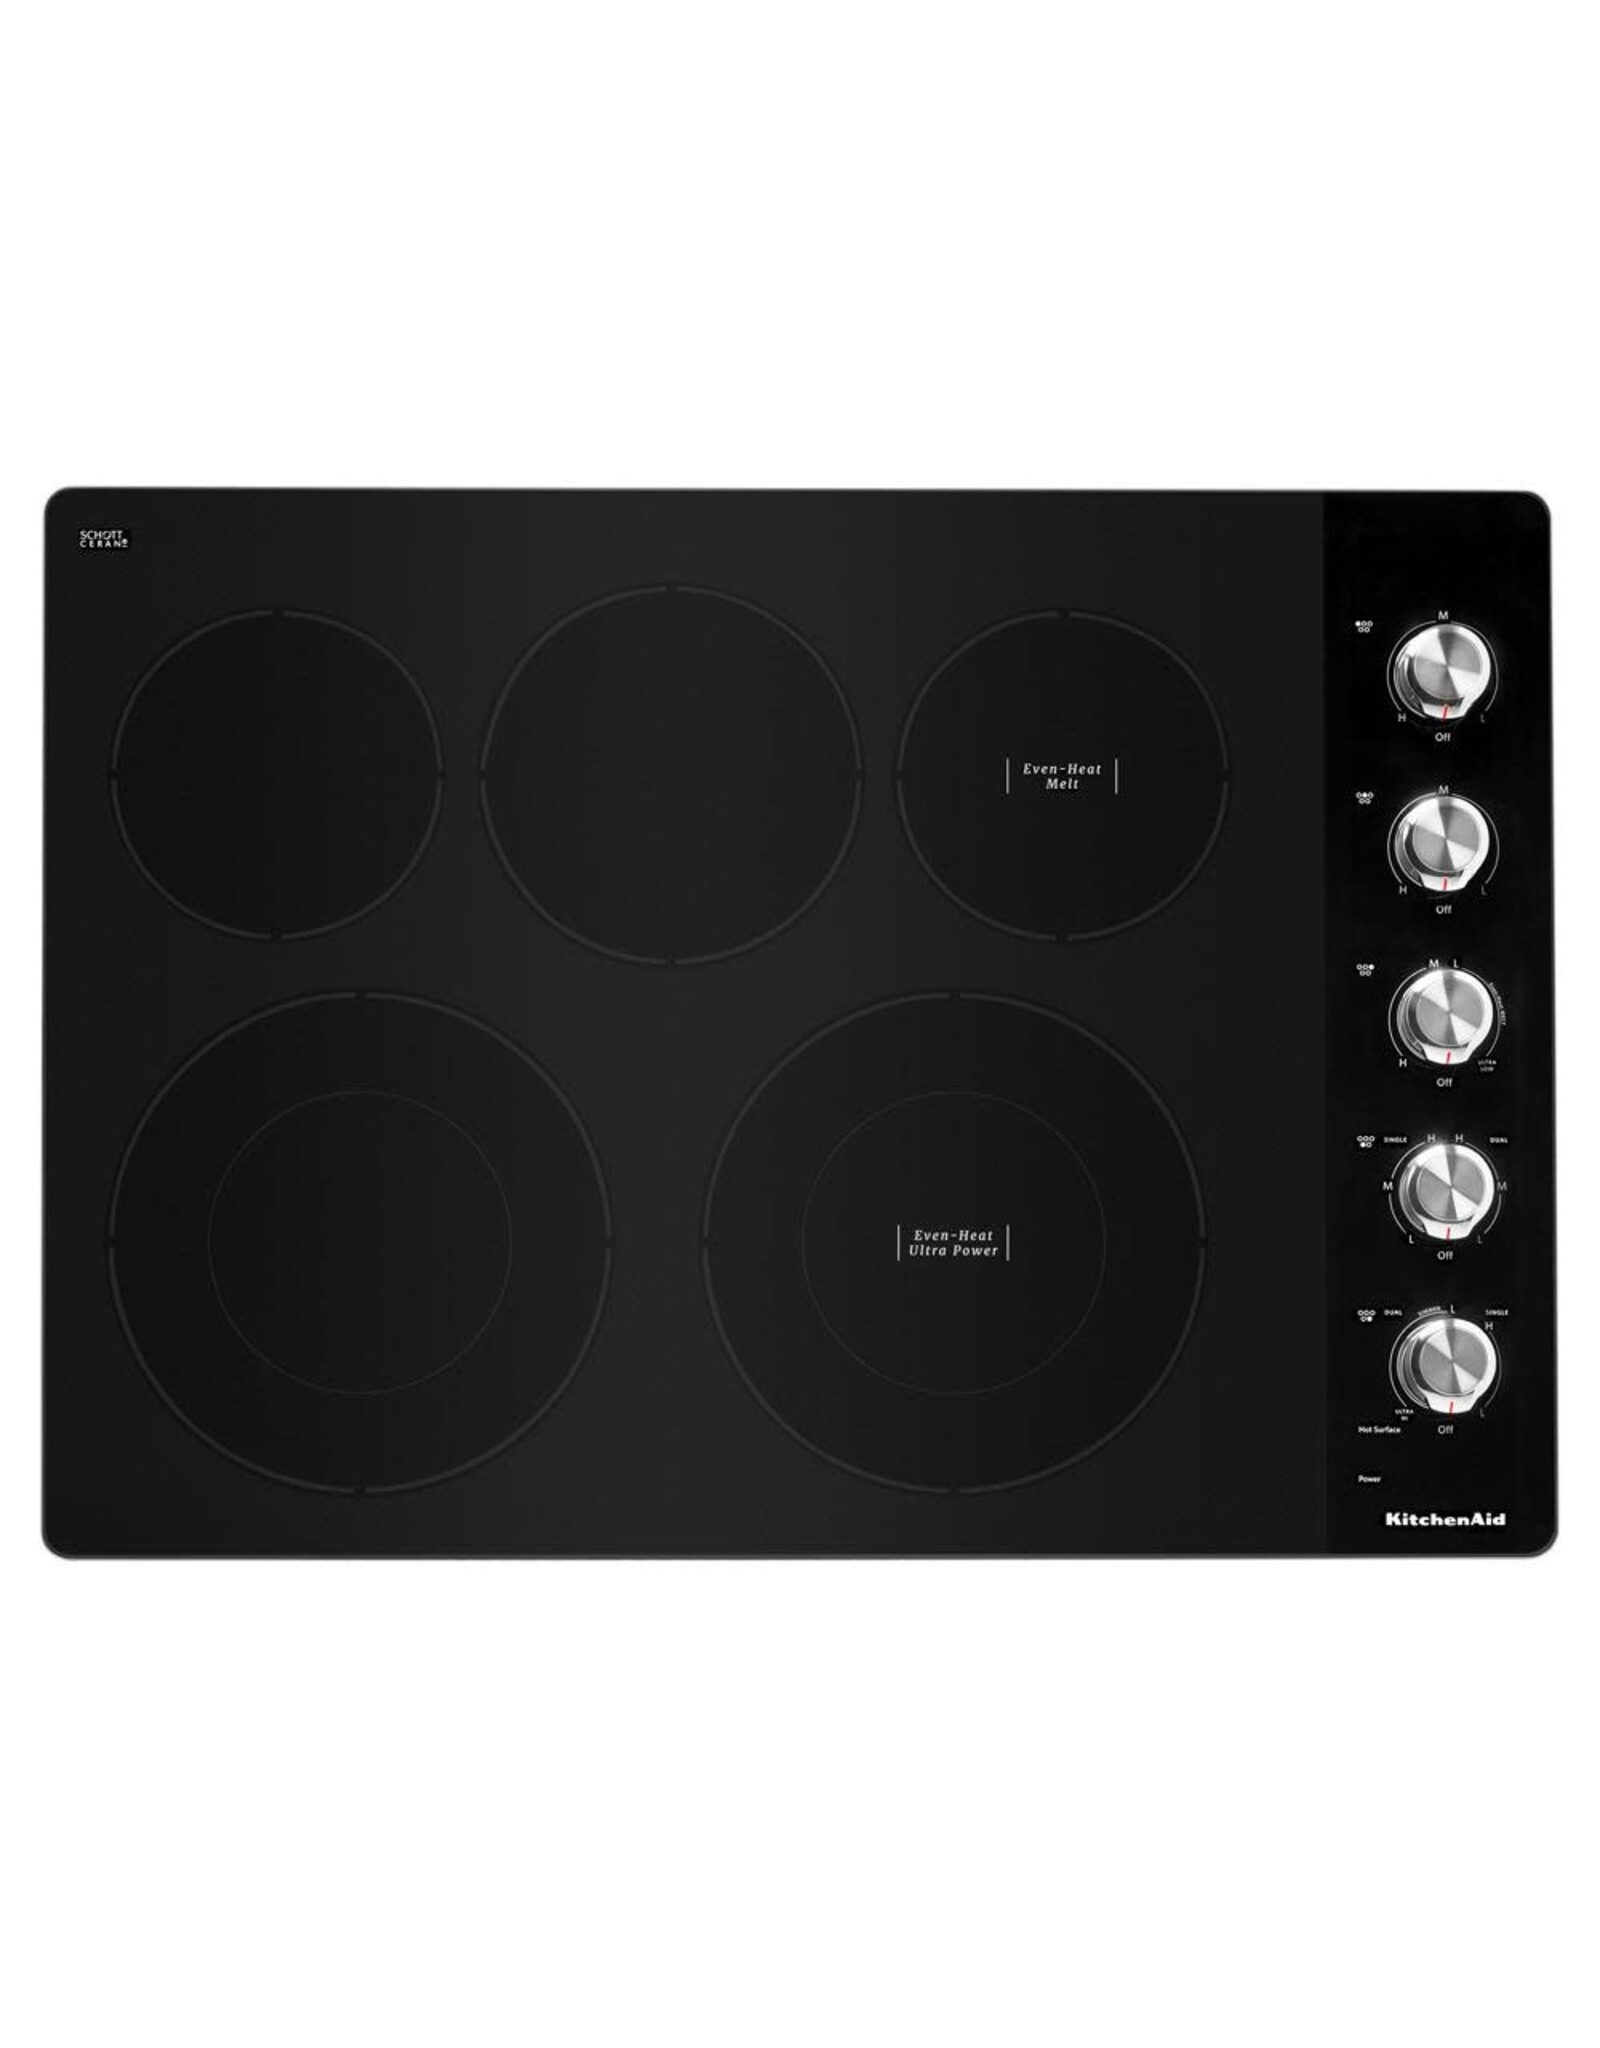 KCES550HSS 30 in. Radiant Electric Cooktop in Stainless Steel with 5-Elements and Knob Controls